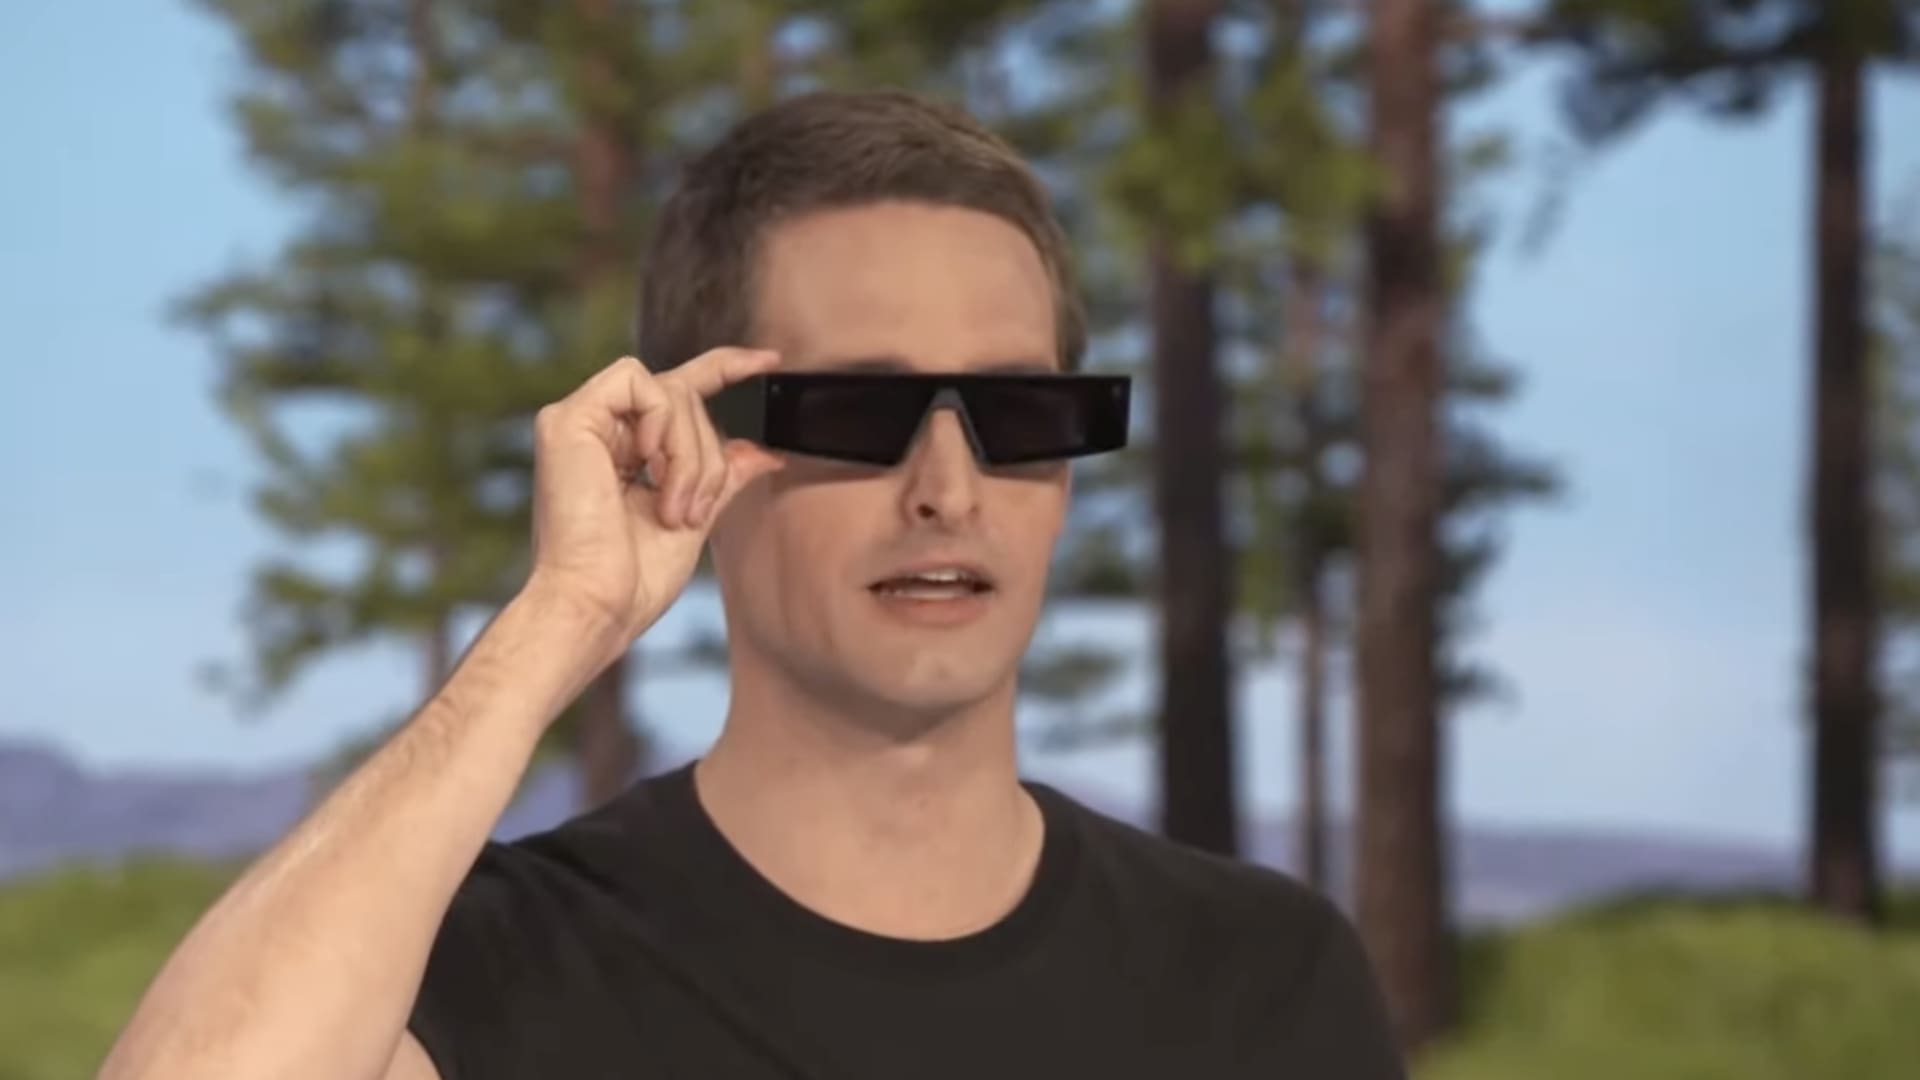 Evan Spiegel, CEO of Snap, announces new Spectacles AR glasses that let you overlay digital objects on the real world.